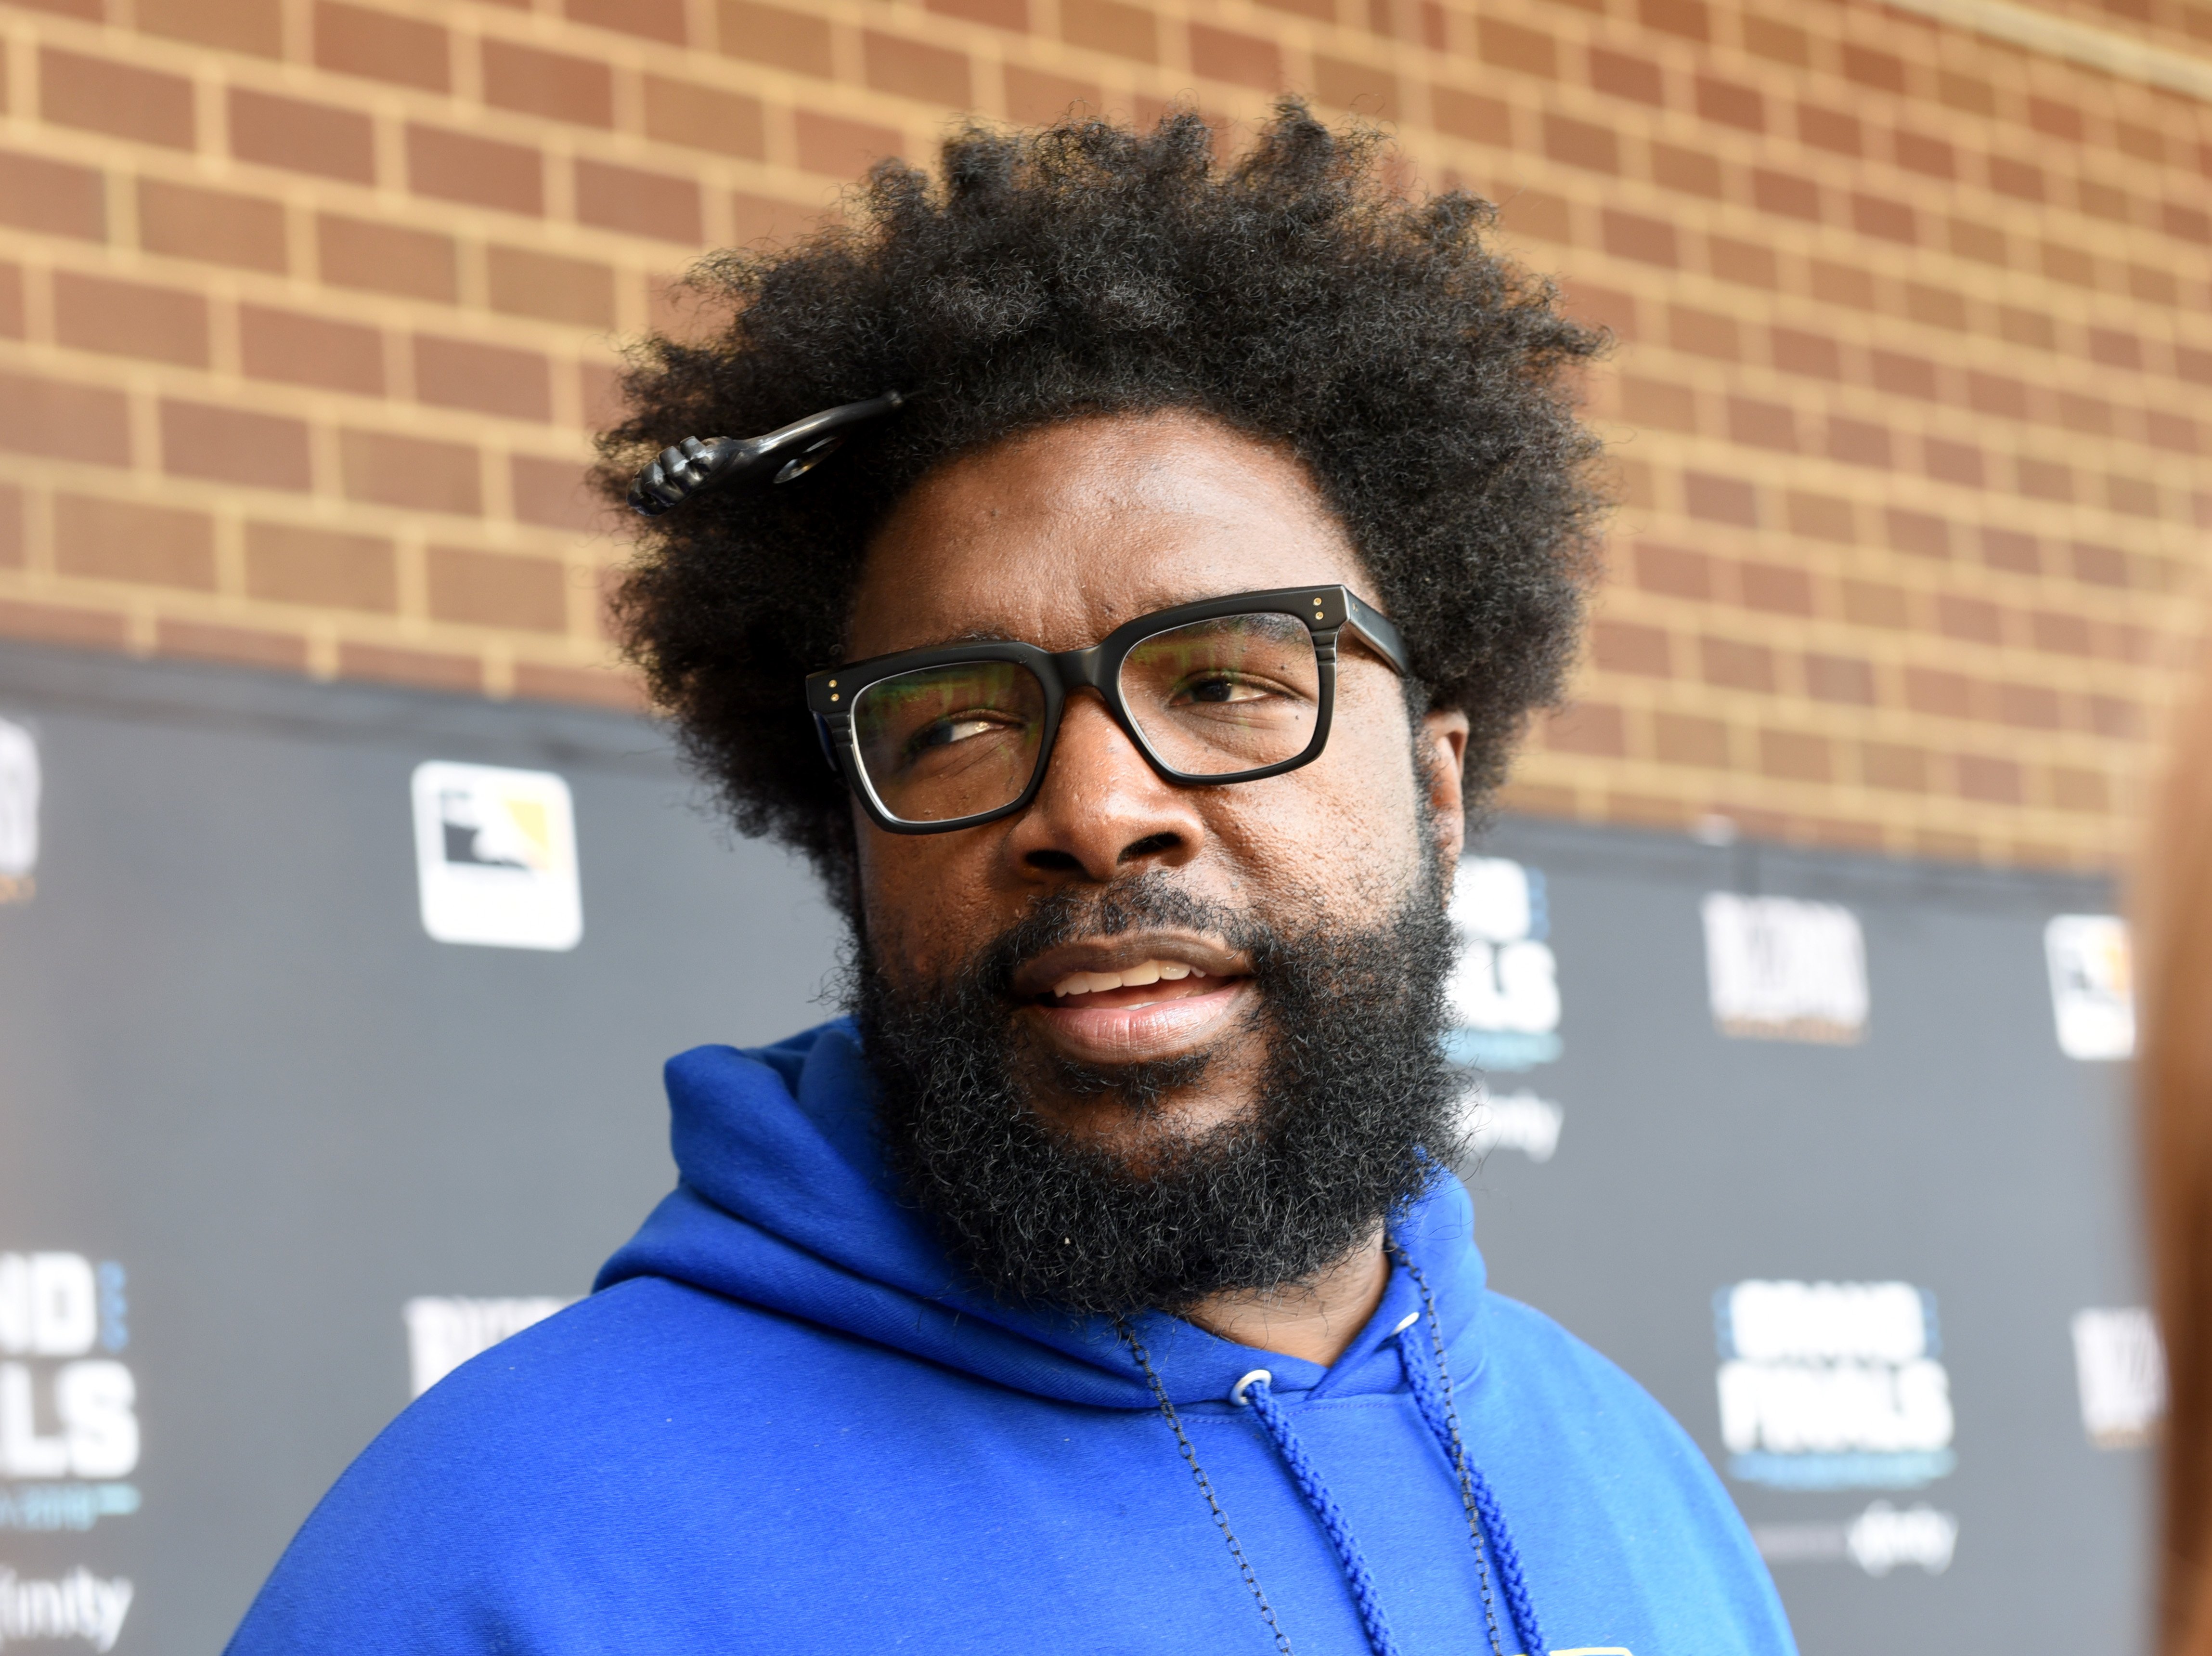 A close-up of Questlove's face looking away from the camera